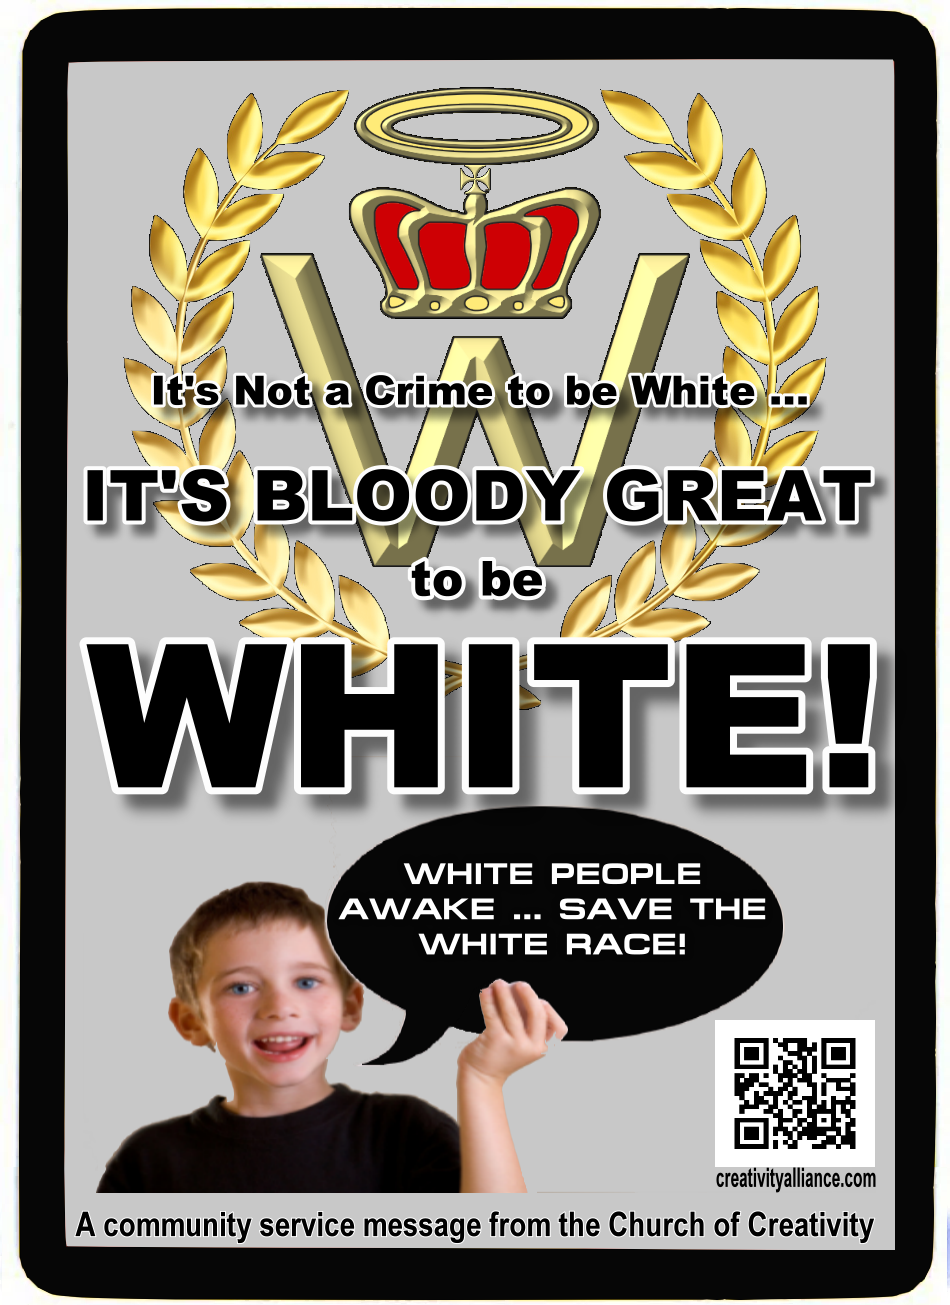 23 Words
What is good for the White Race is of the Highest Virtue;
What is bad for the White Race is the Ultimate Sin.